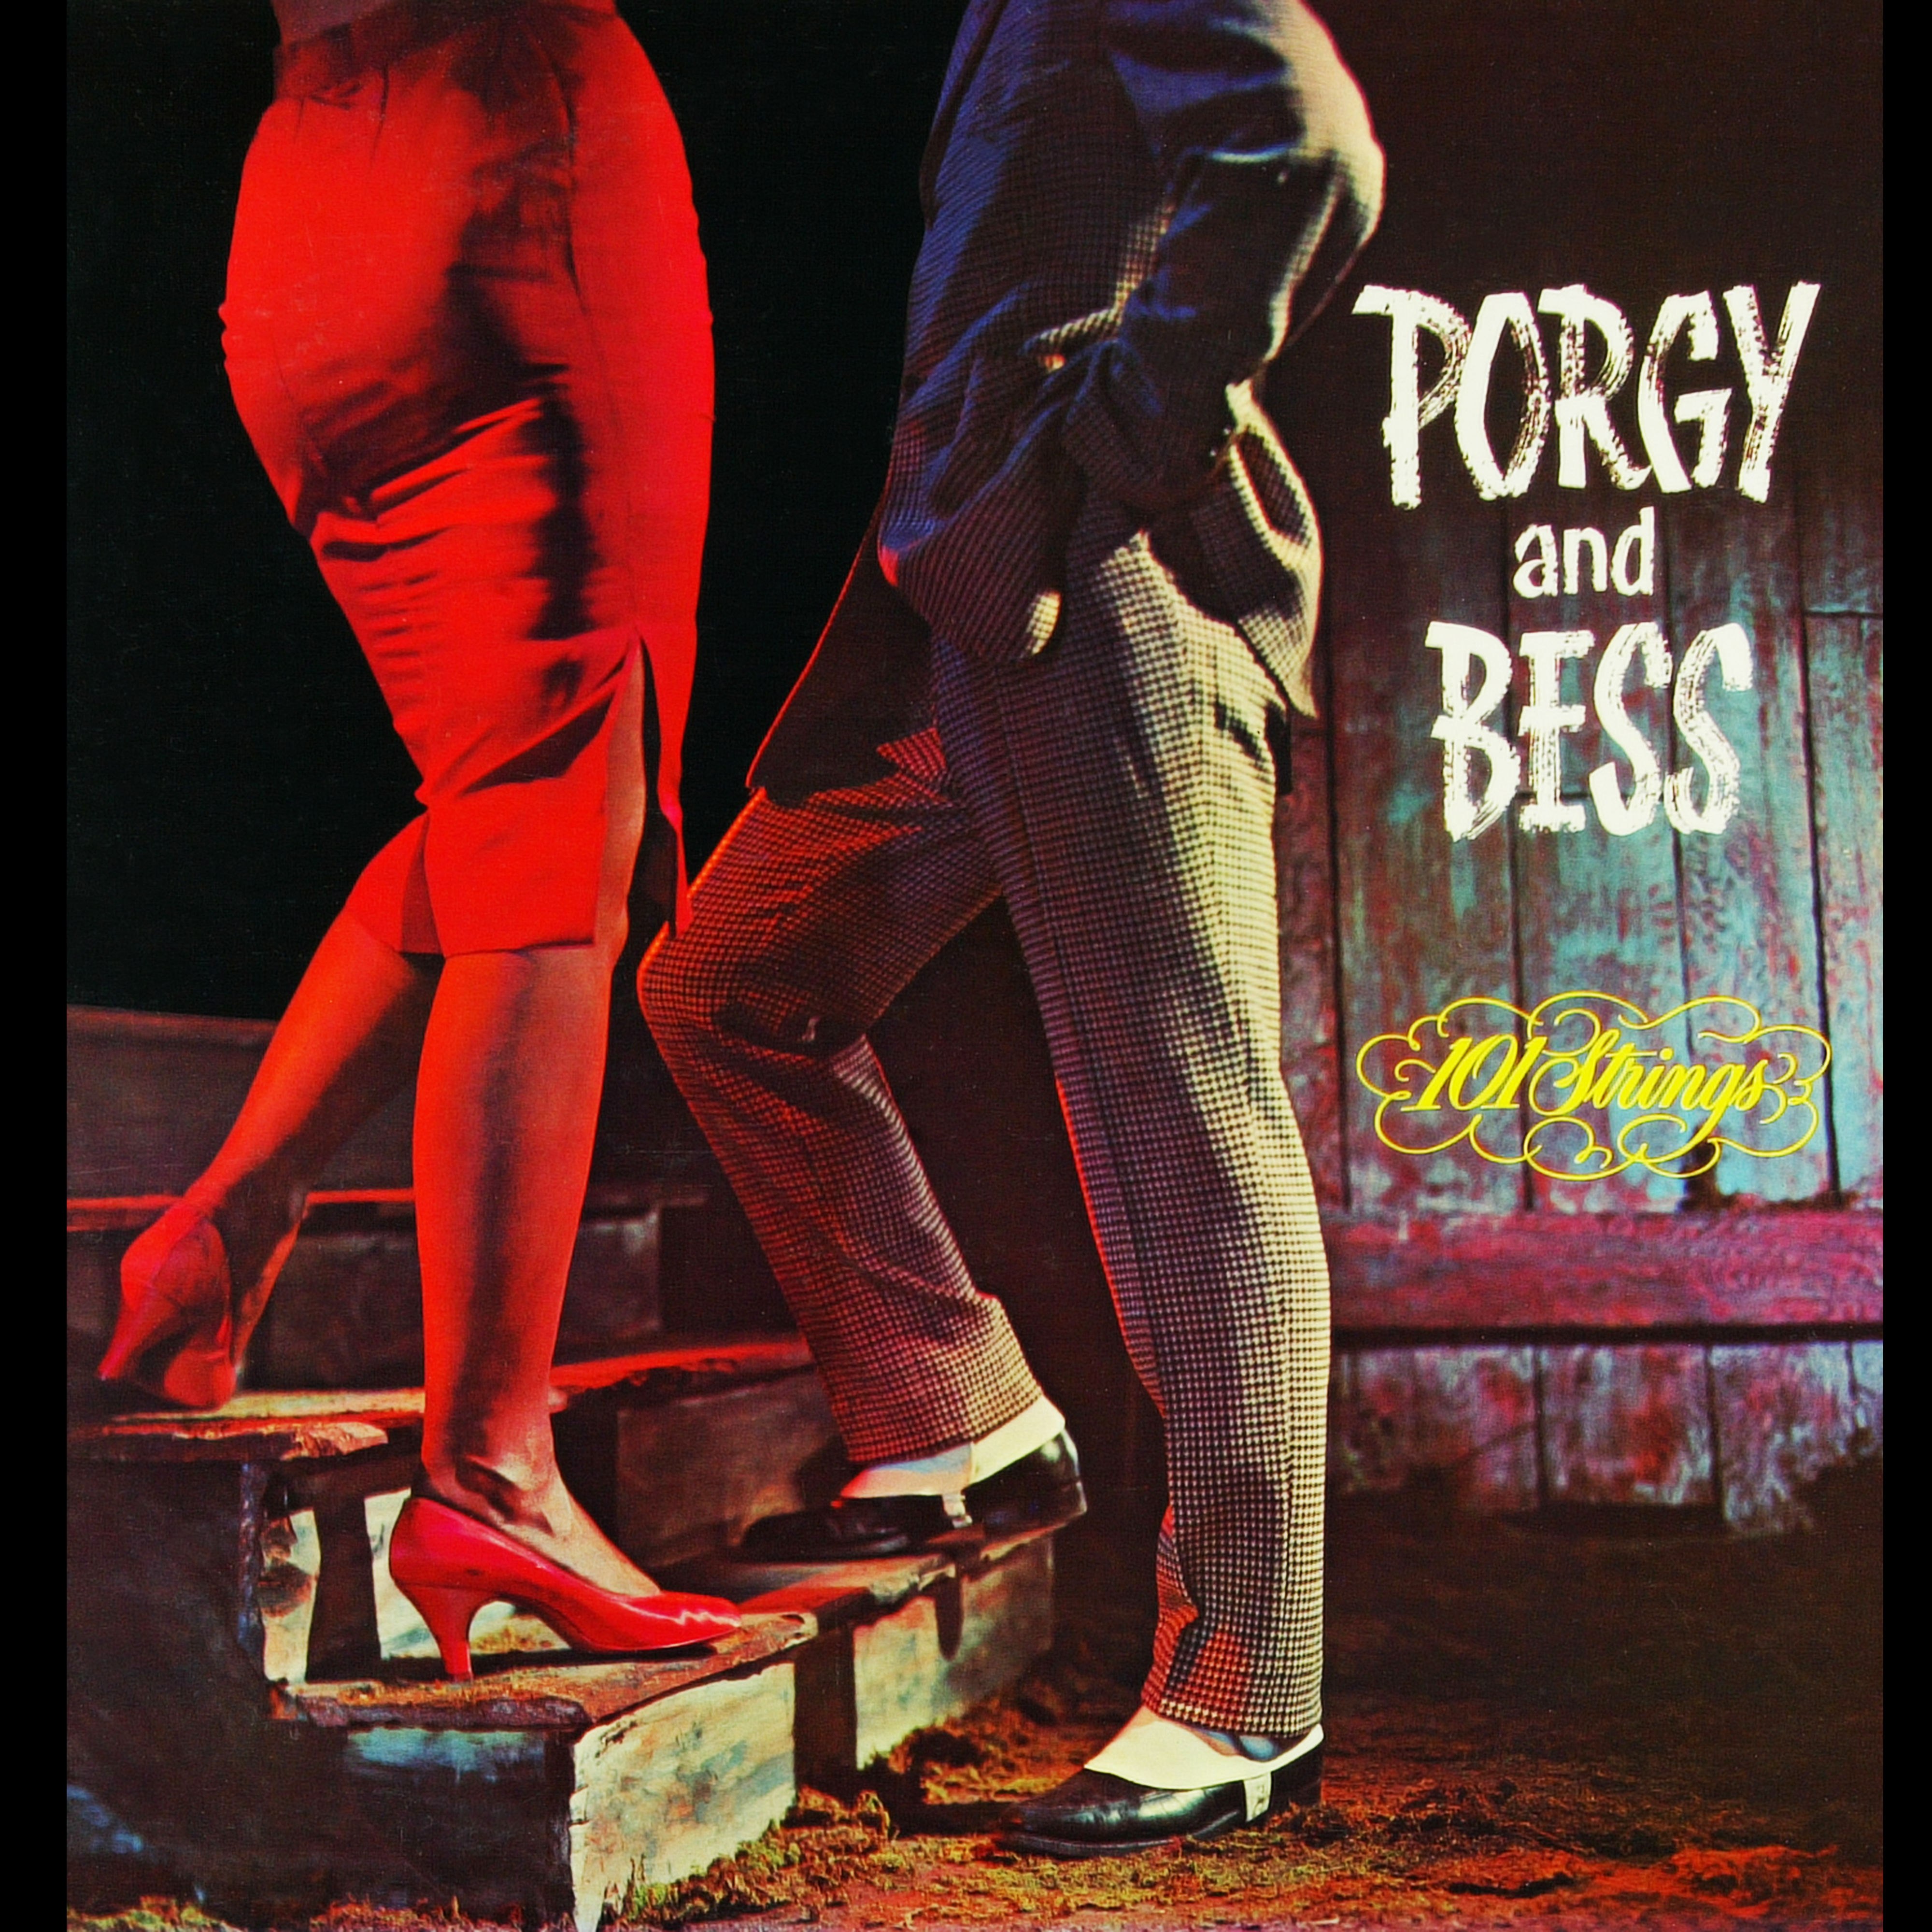 101 Strings Orchestra - Porgy and Bess (1959/2021) [FLAC 24bit/96kHz]